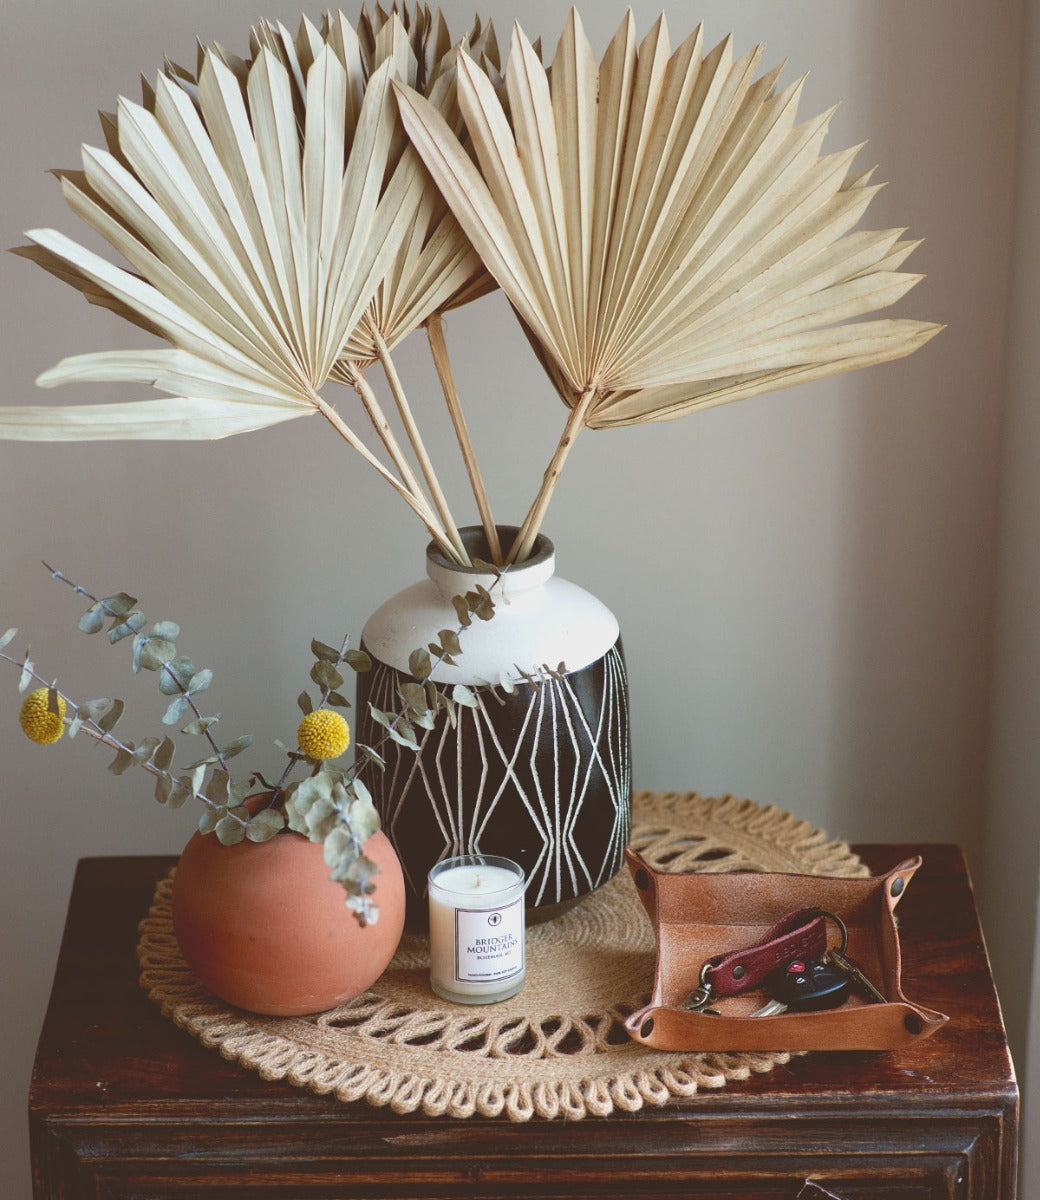 A Bed Stu Expanse vase with palm leaves and a candle on a table.